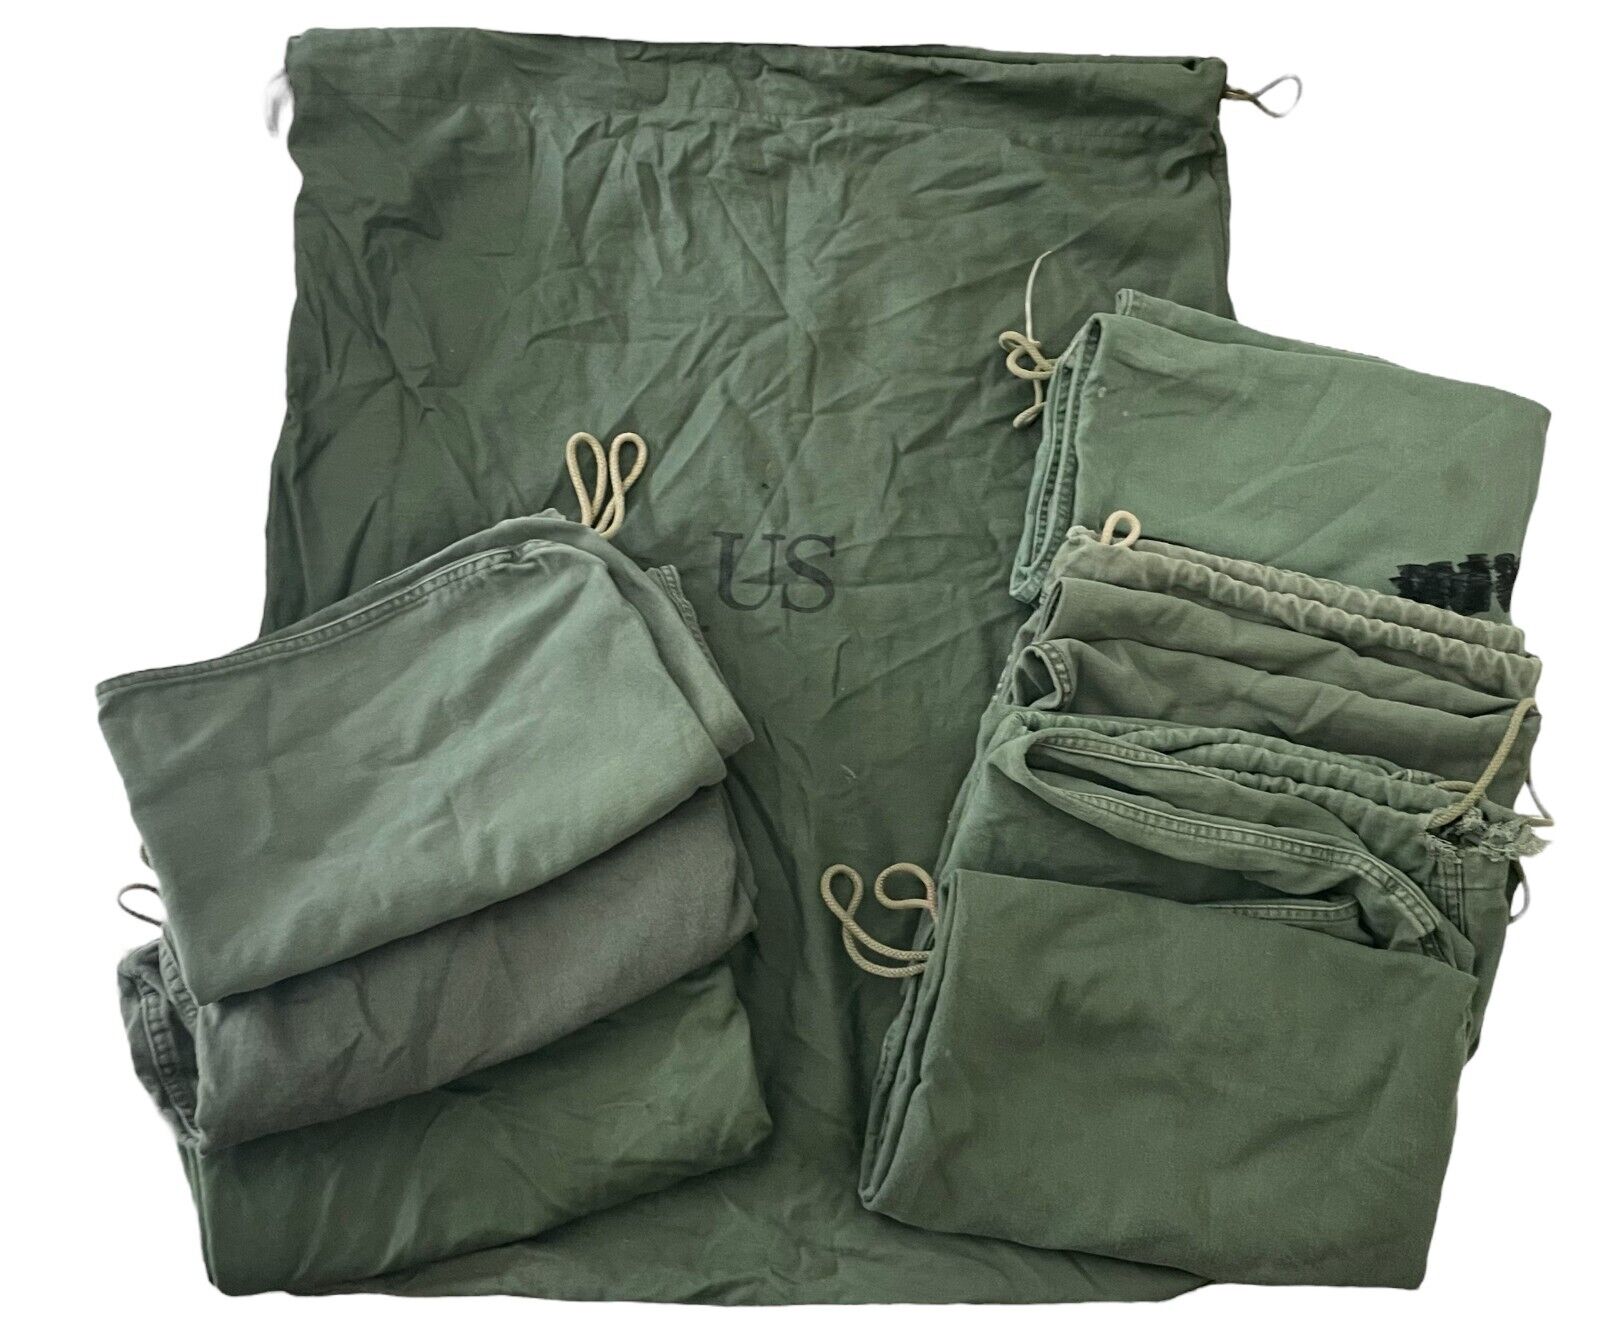 Lot of 8 US Army BARRACKS BAGS OD Green 100% Cotton Large Laundry Bags Military